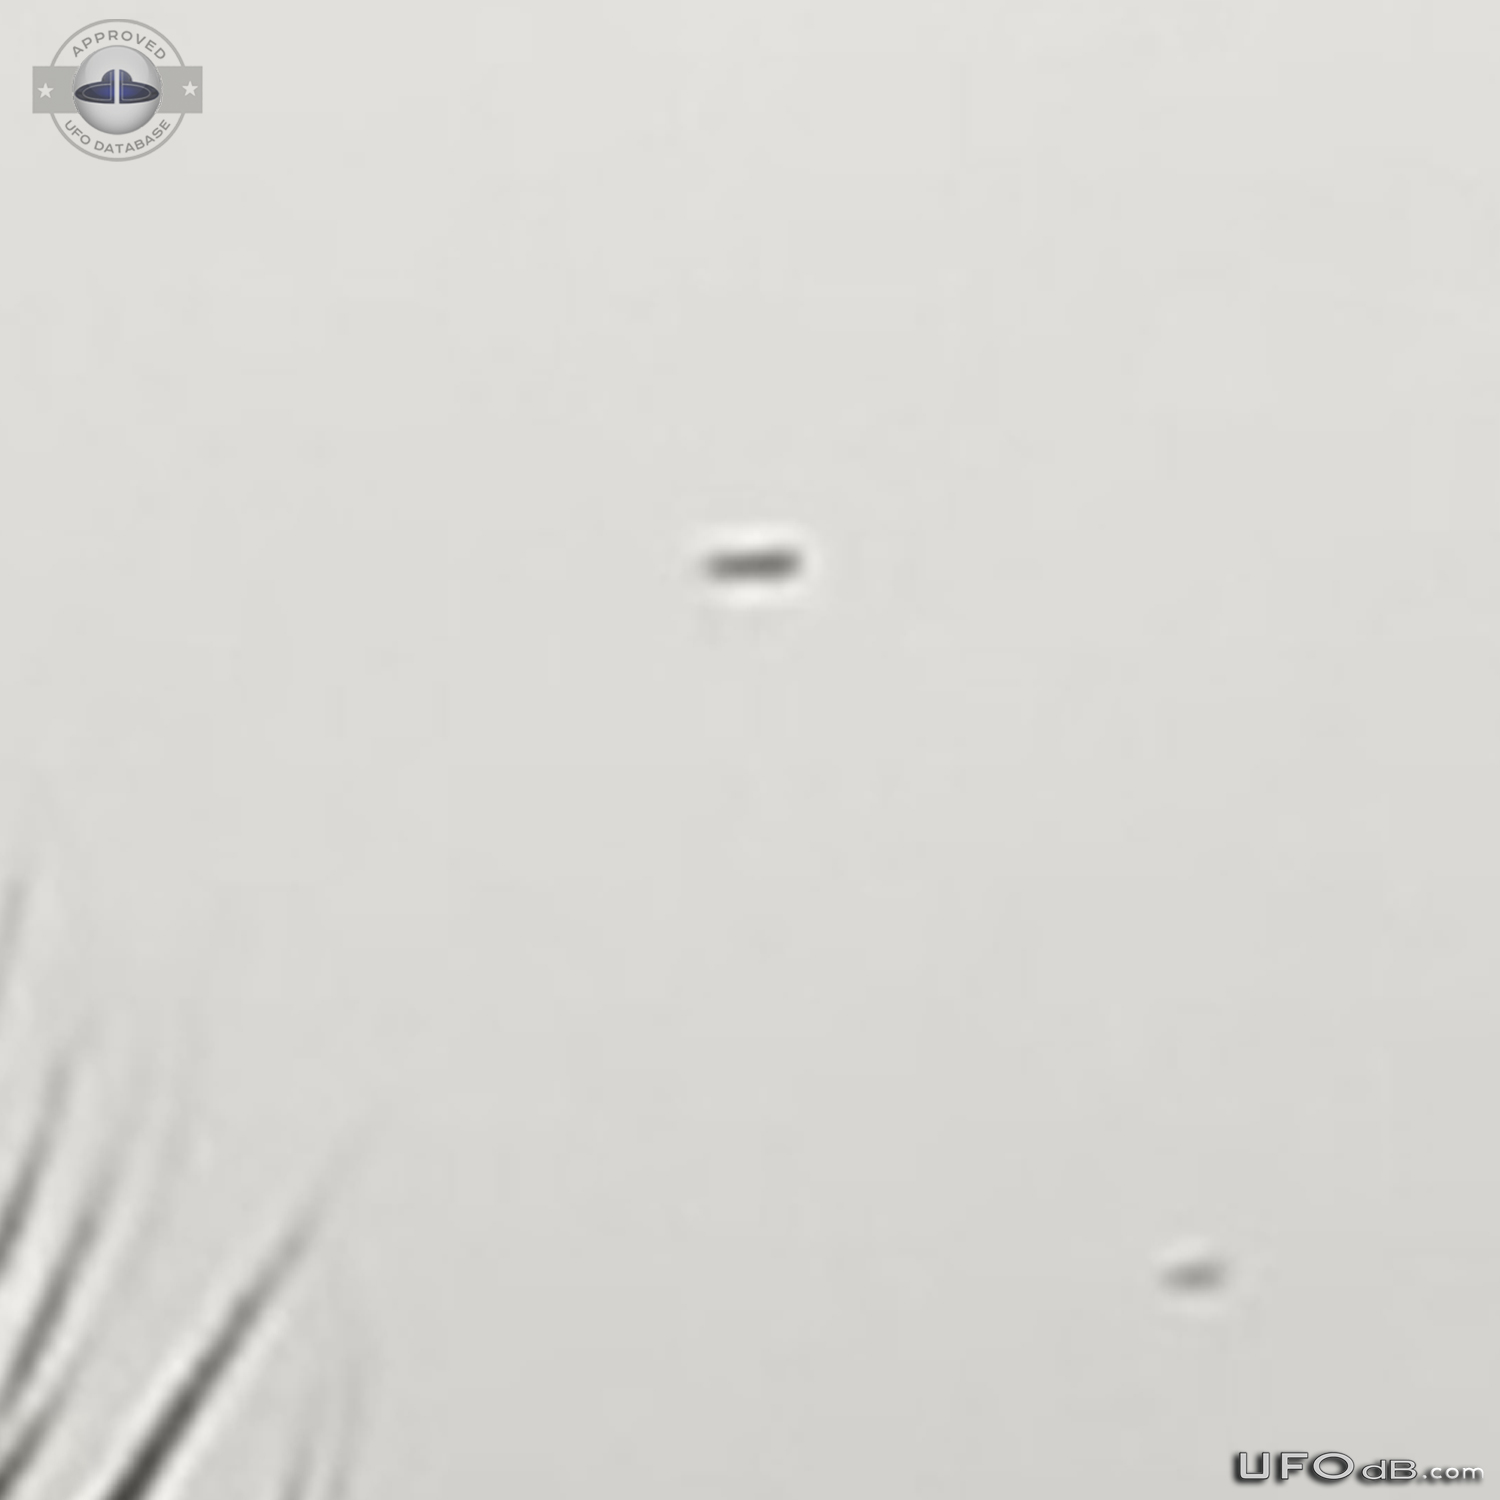 3 disc shaped UFOs seen over Siracusa Sicily Italy january 2014 UFO Picture #599-6